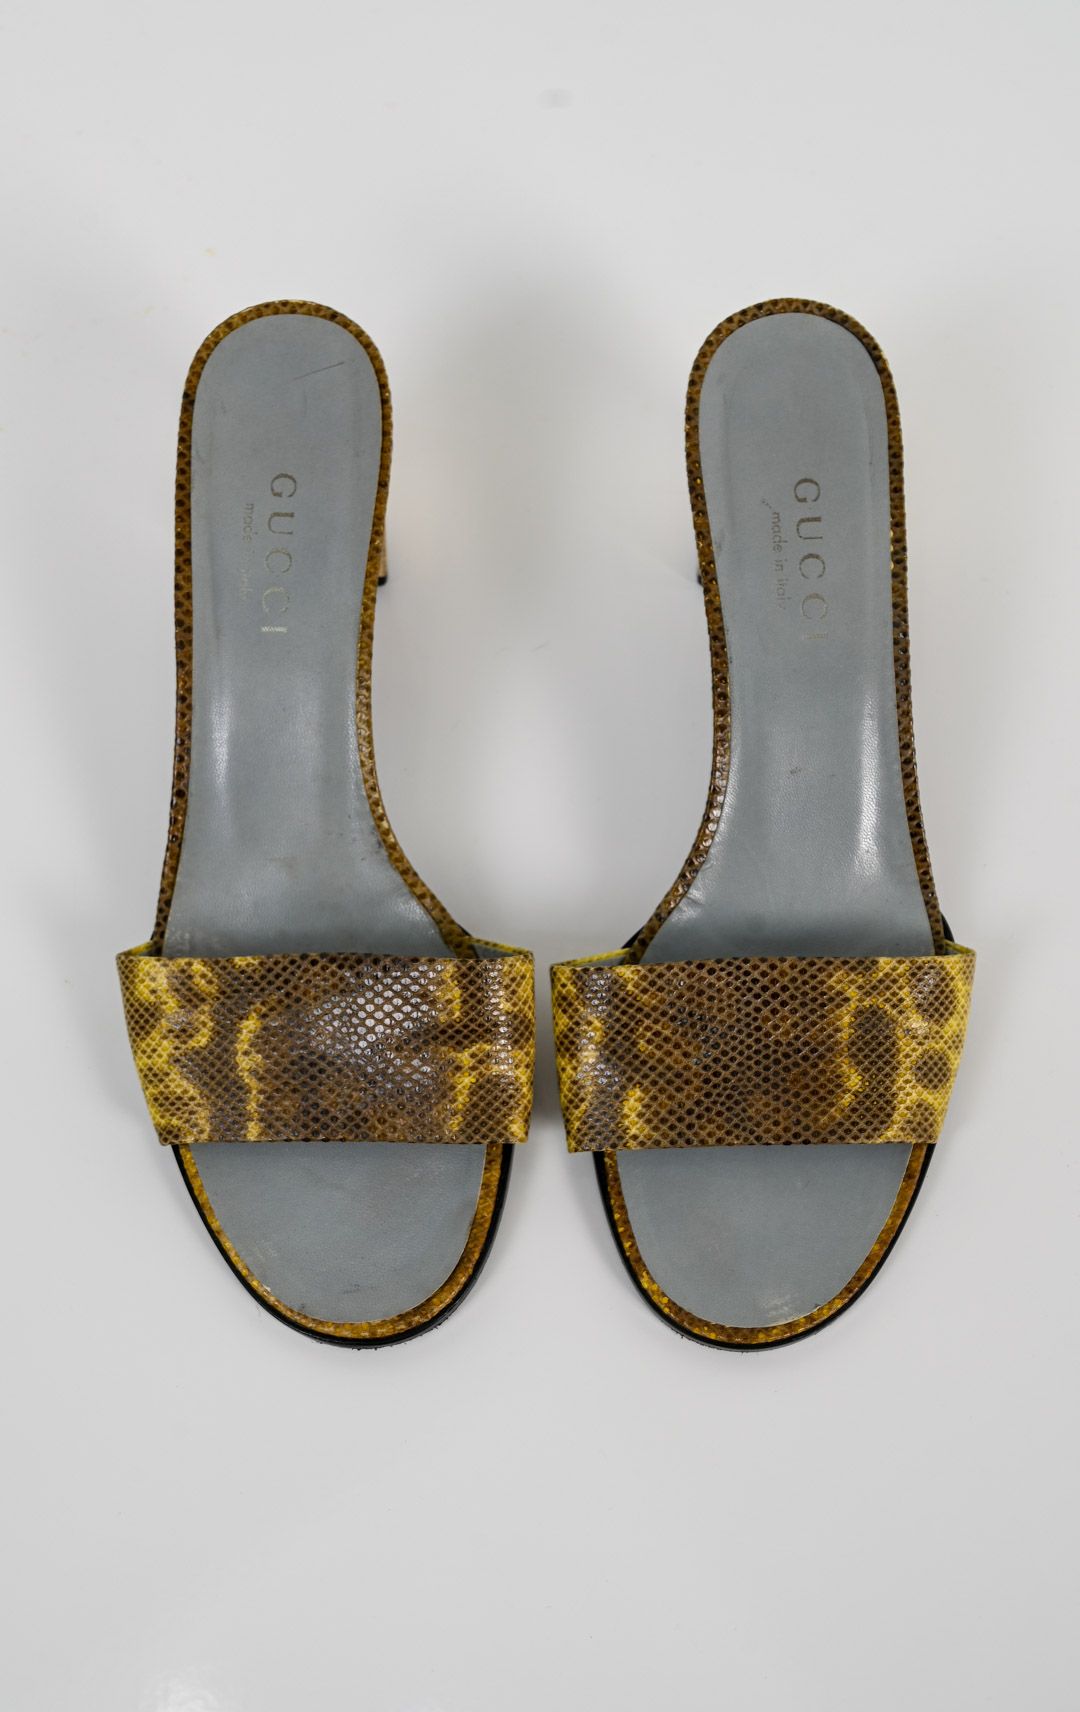 Gucci Canary Snakeskin Sandals (40) - 2